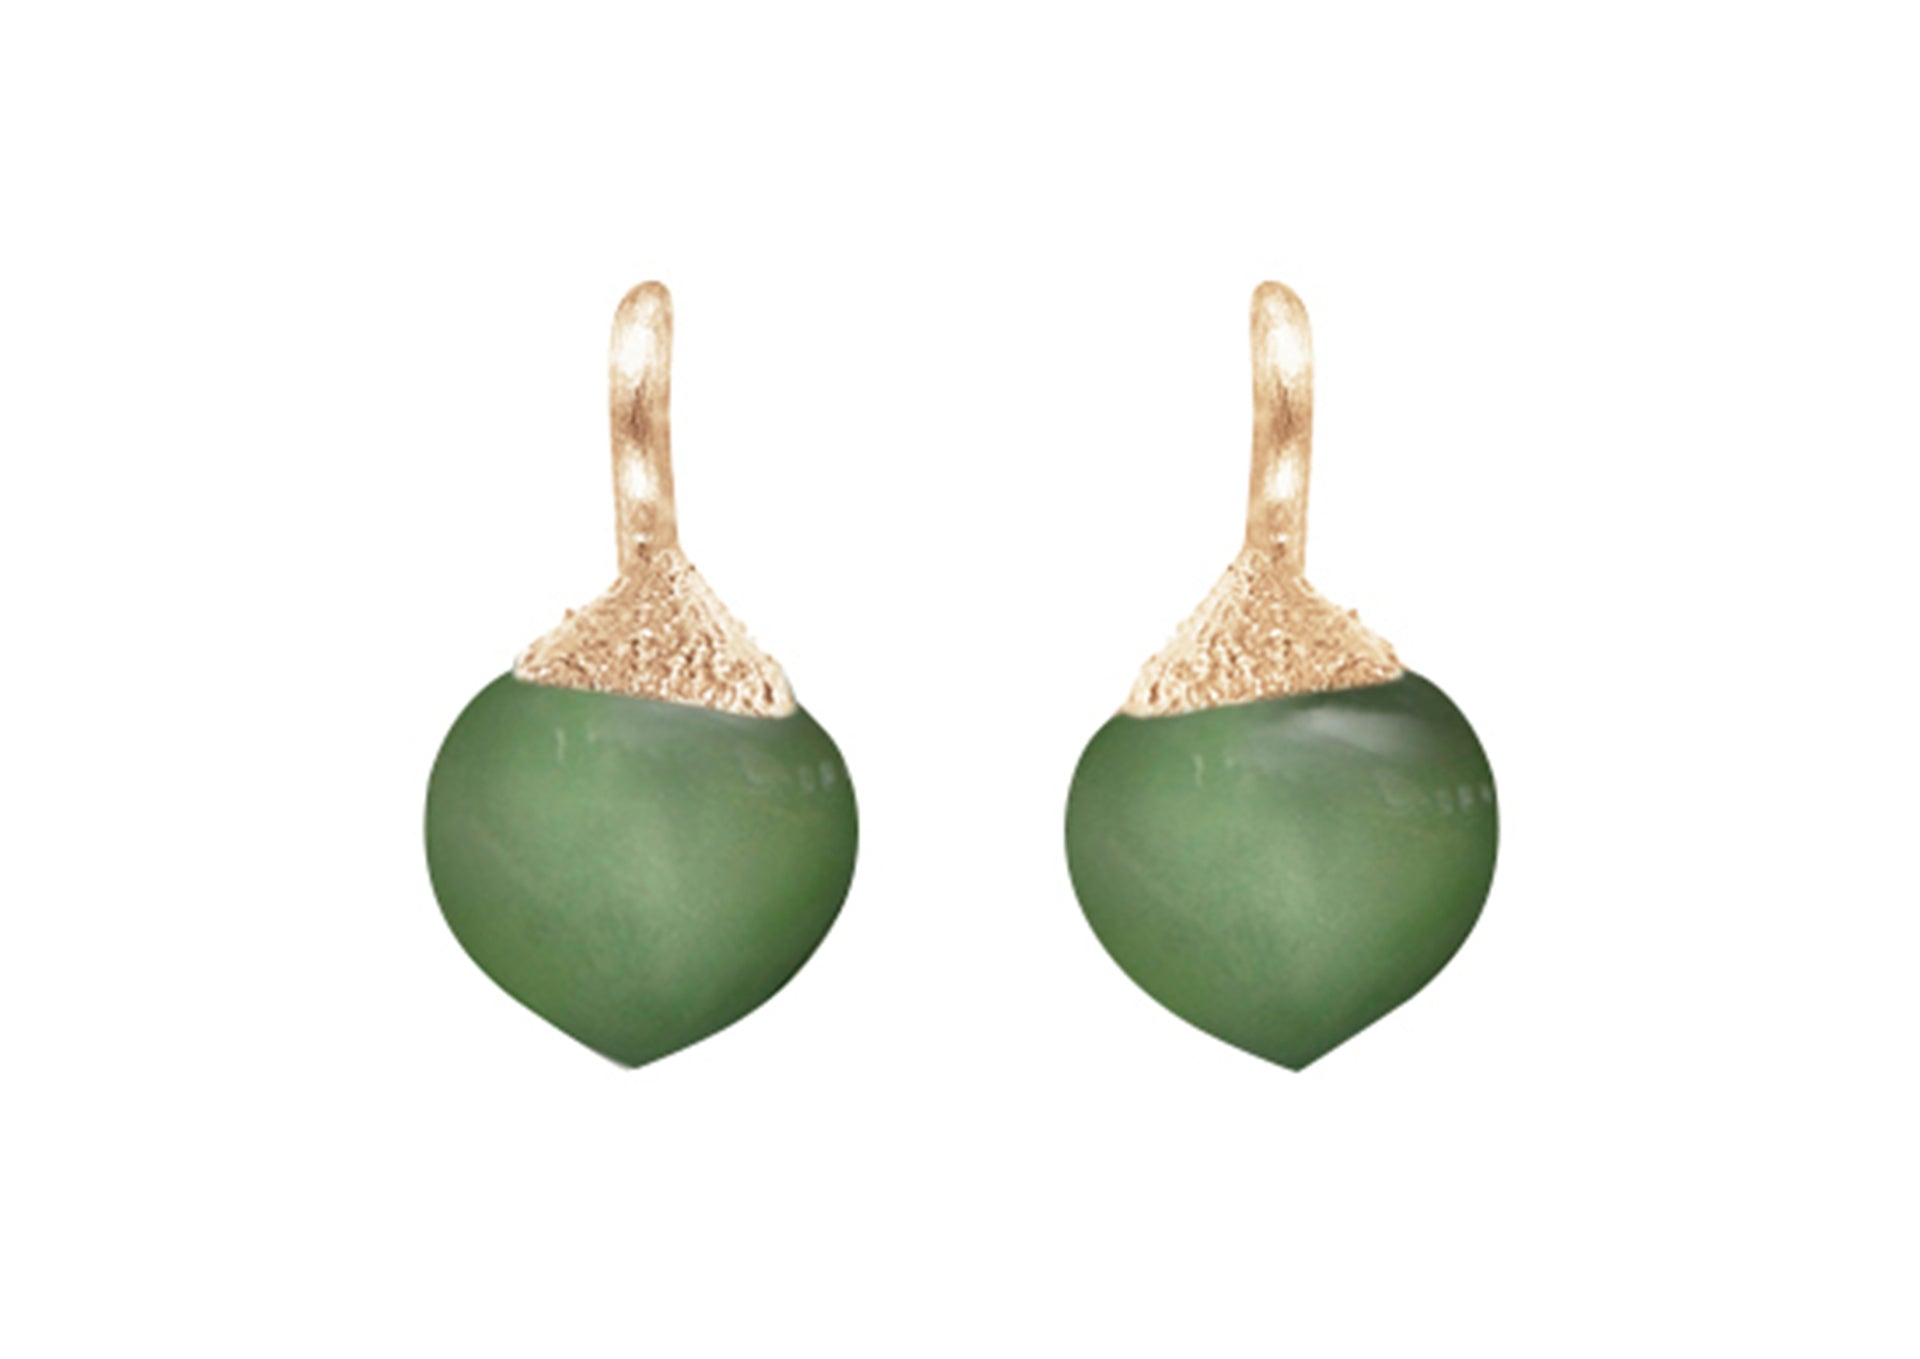 Dew Drops Earrings in 18K yellow gold with Serpentine